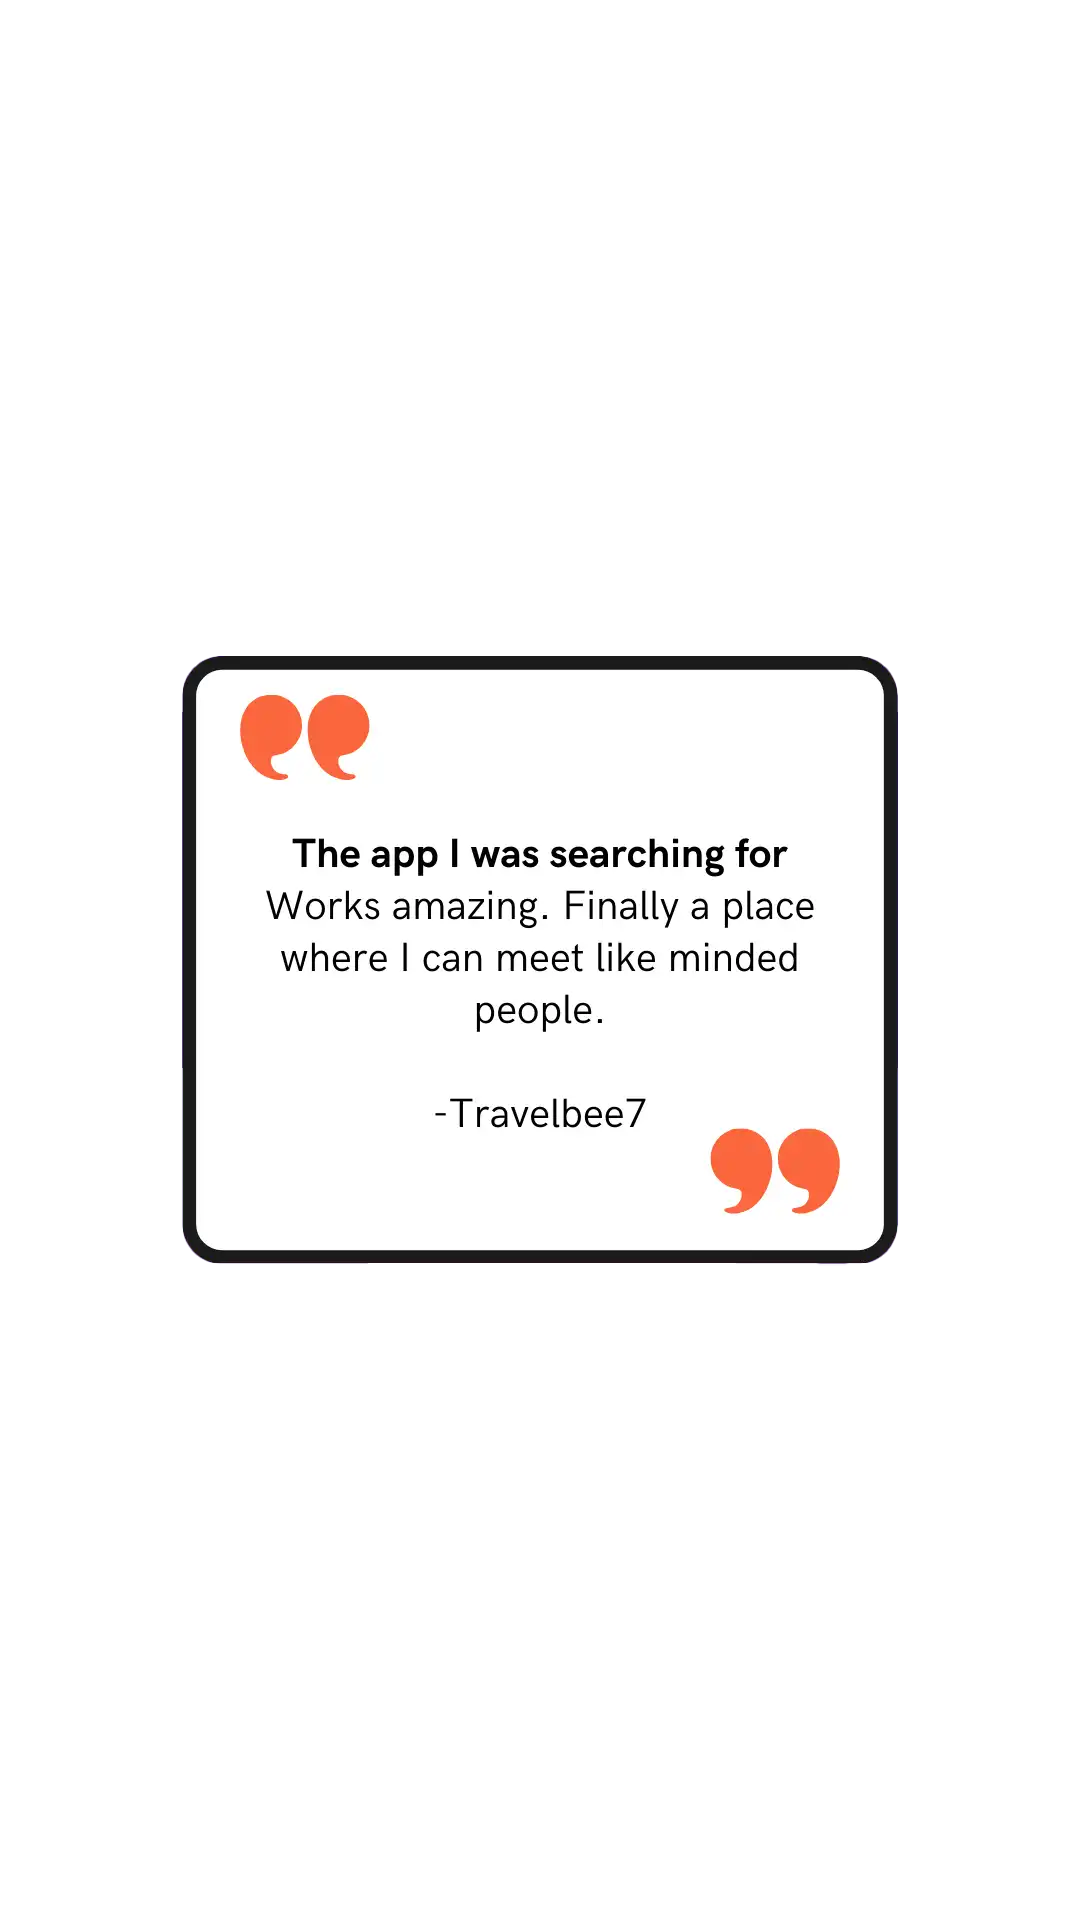 Review travelbee7